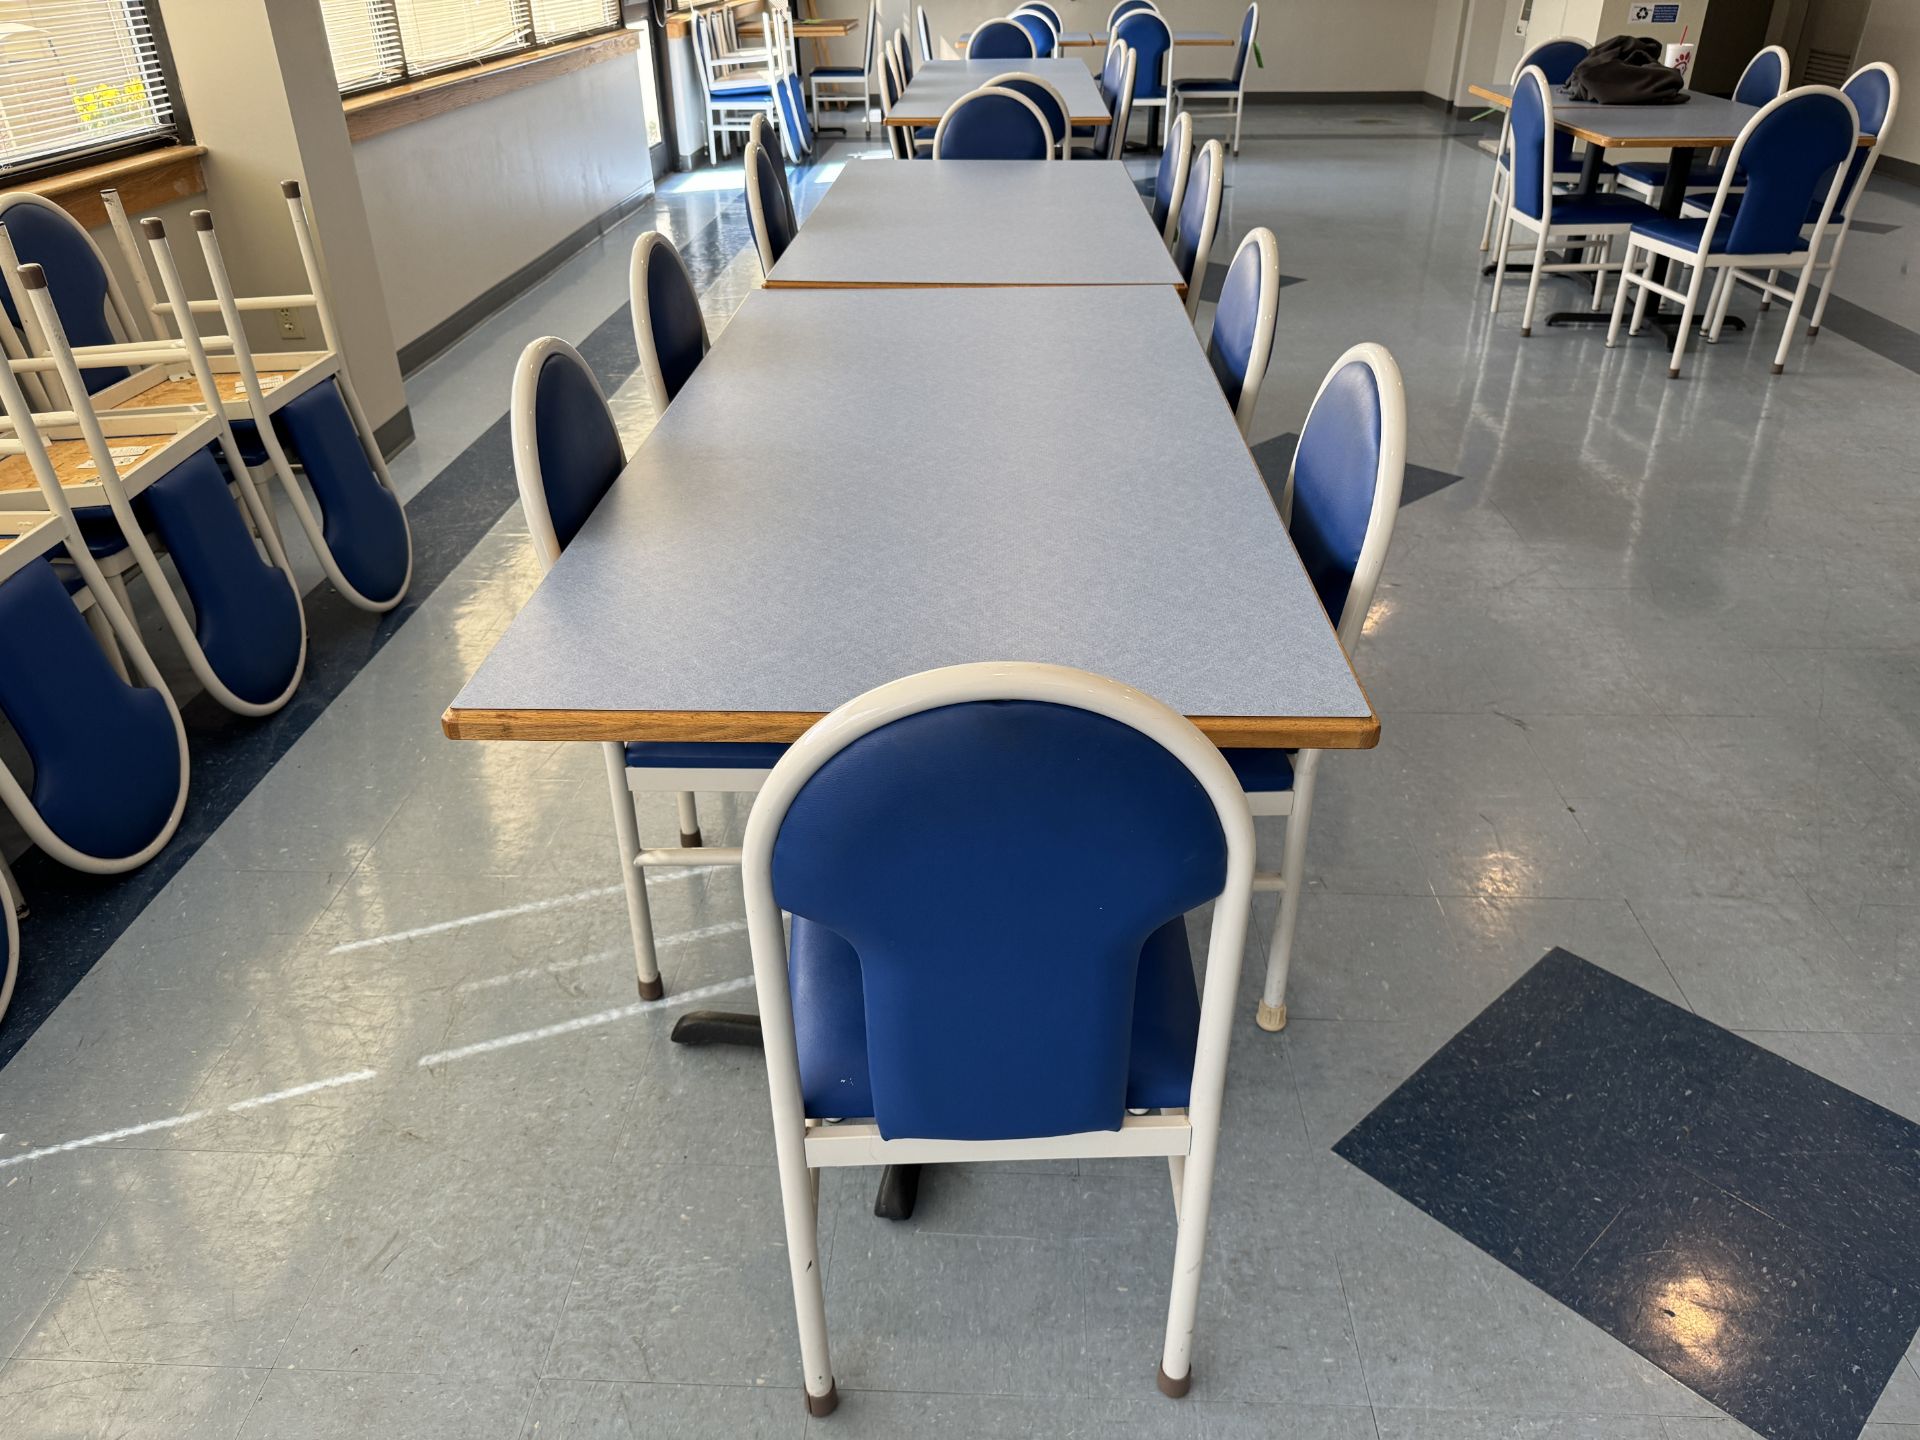 (2) DINING TABLES WITH (10) CHAIRS (ZONE 3) - Image 2 of 2